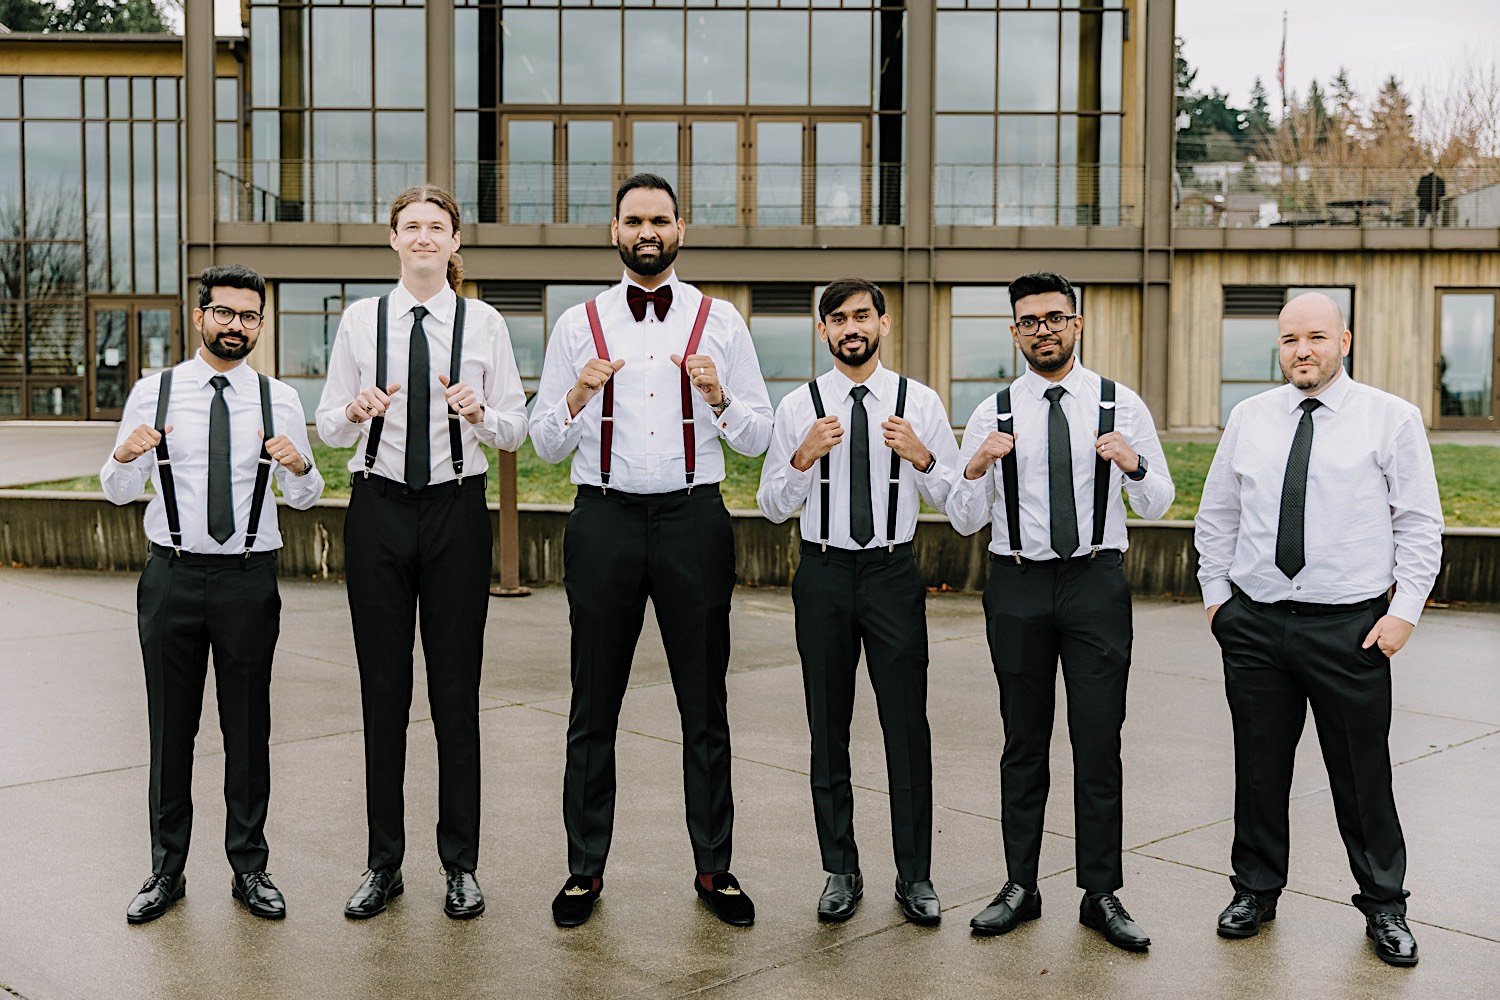 Groom and groomsmen pose together looking at the camera outside the Rosehill Community Center